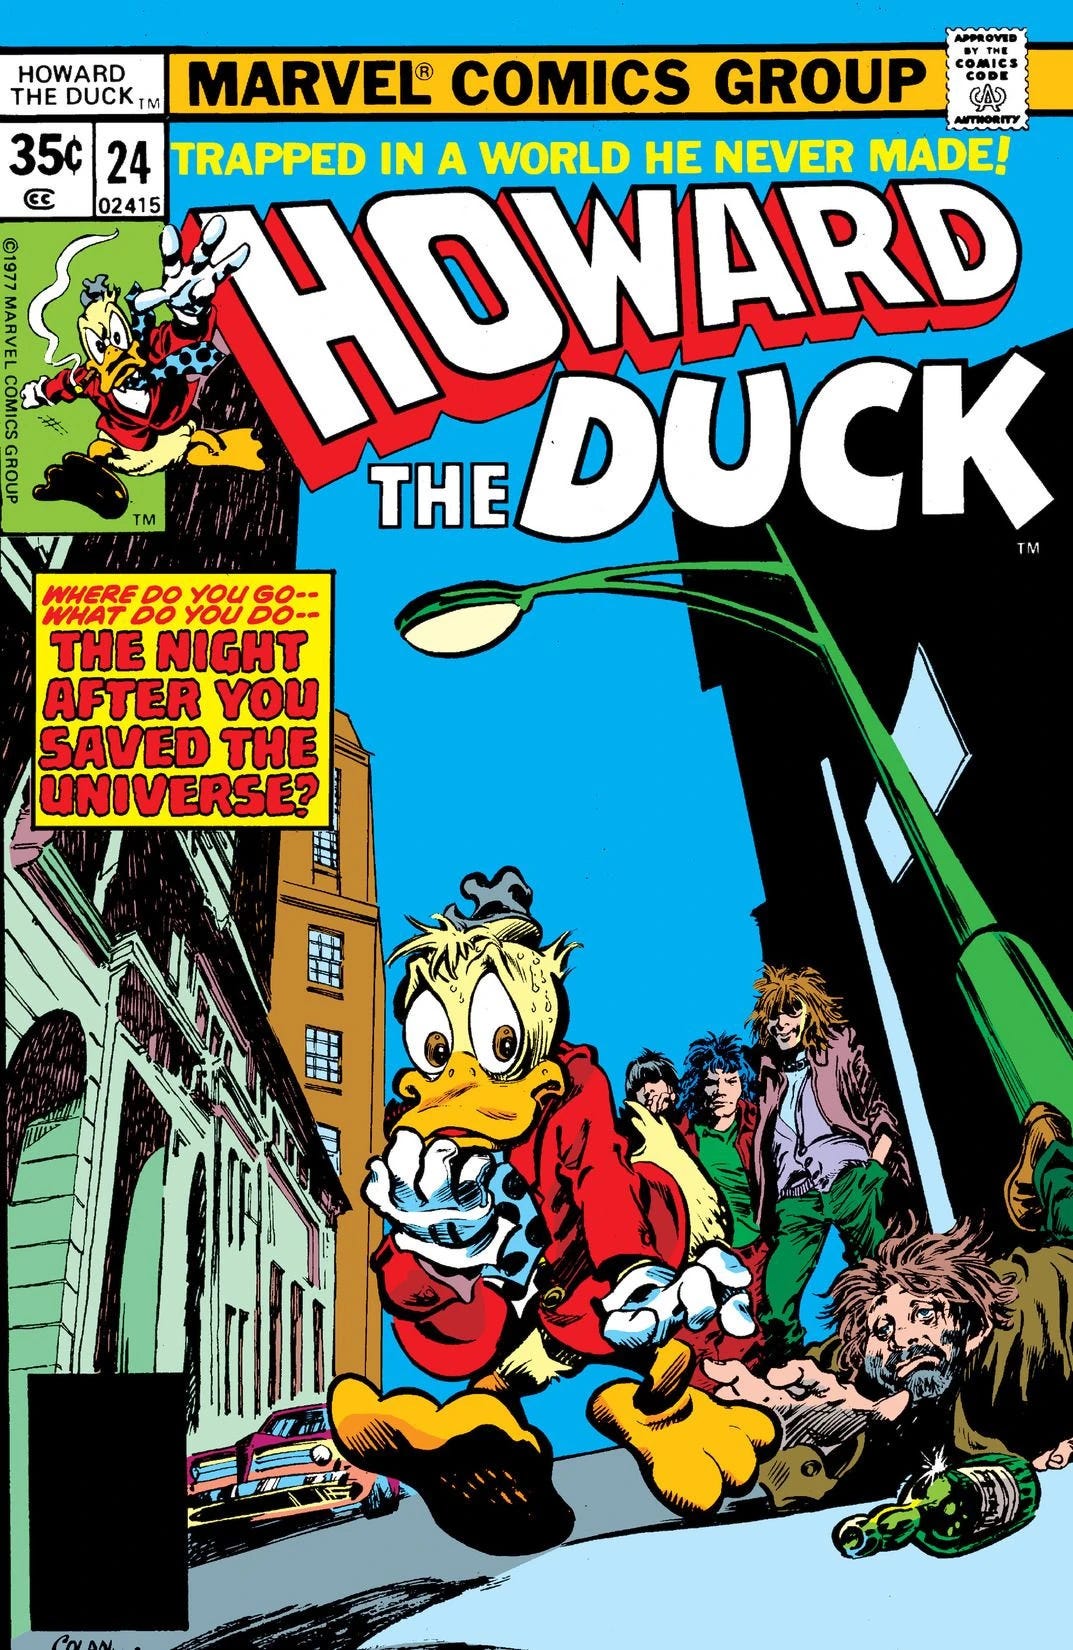 The cover to a Howard the Duck comic book, which asks "Where do you go and what do you do the night after you've saved the universe?"